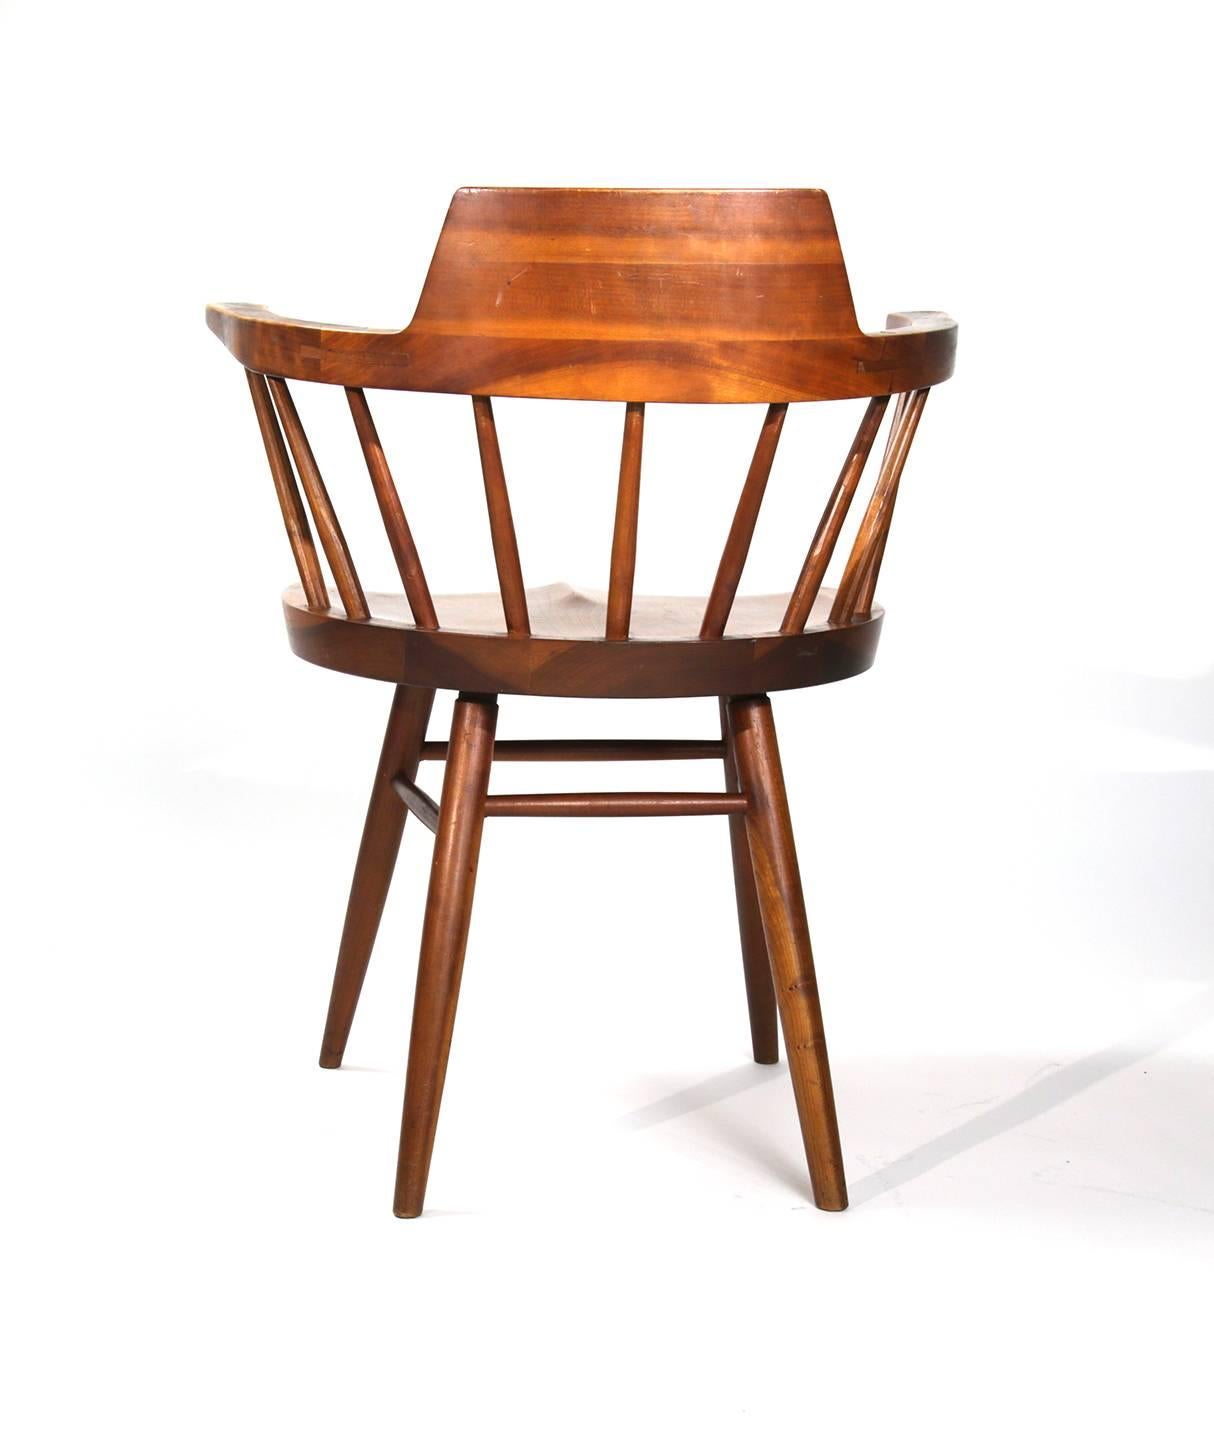 George Nakashima black walnut captain's chair with hand carved seat and spindles. Classic Nakashima splayed legs. A beautiful example. Small restoration.